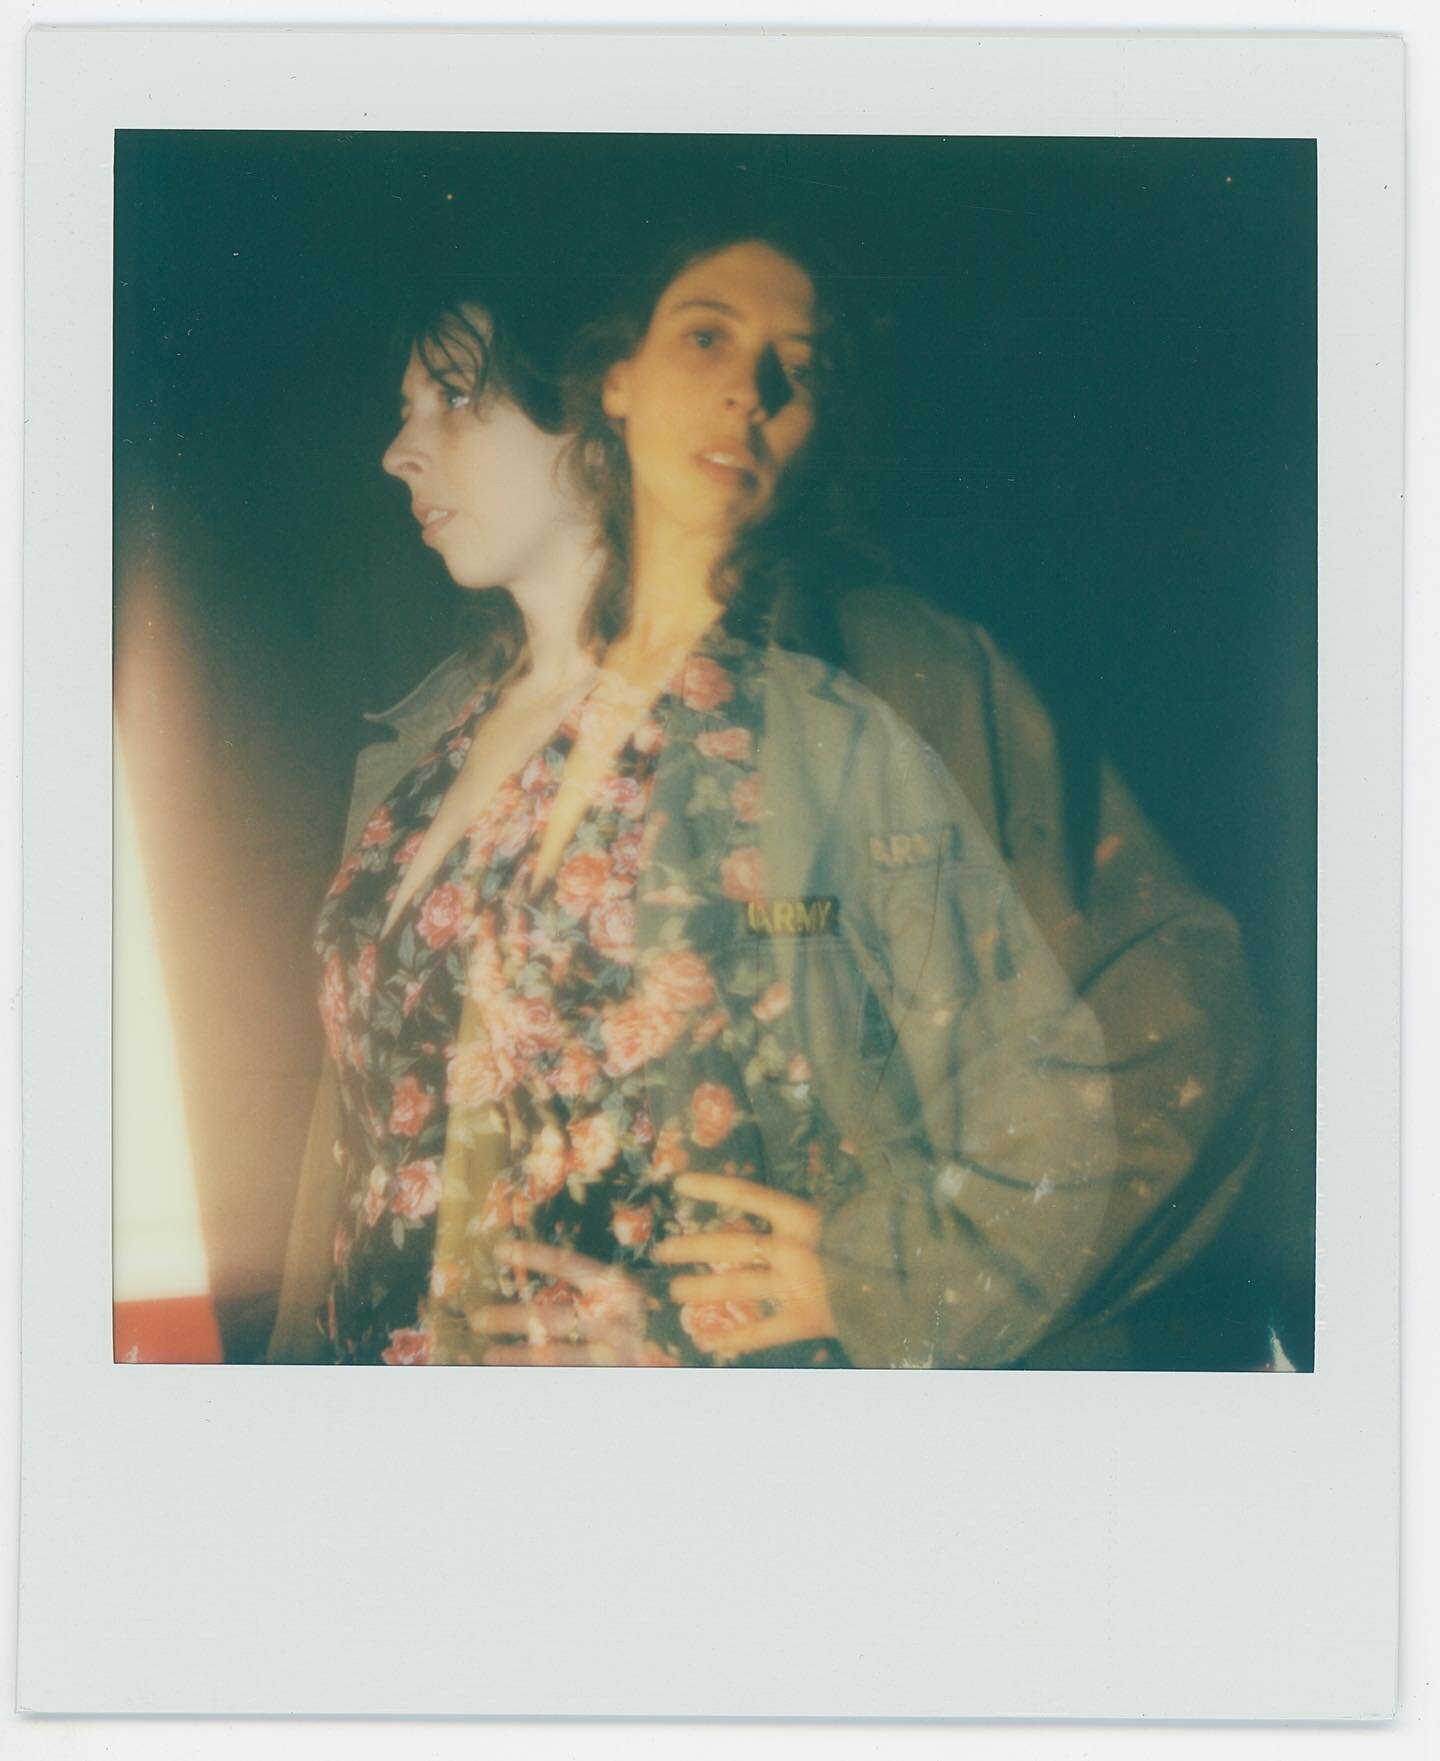 Hello! Here&rsquo;s a Polaroid by the fantastic @kbolterphotography to keep you in the loop about what&rsquo;s coming up this weekend, next month as well as some general merch goings-ons.

This FRIDAY I&rsquo;ll be at @cactus with a full band for the